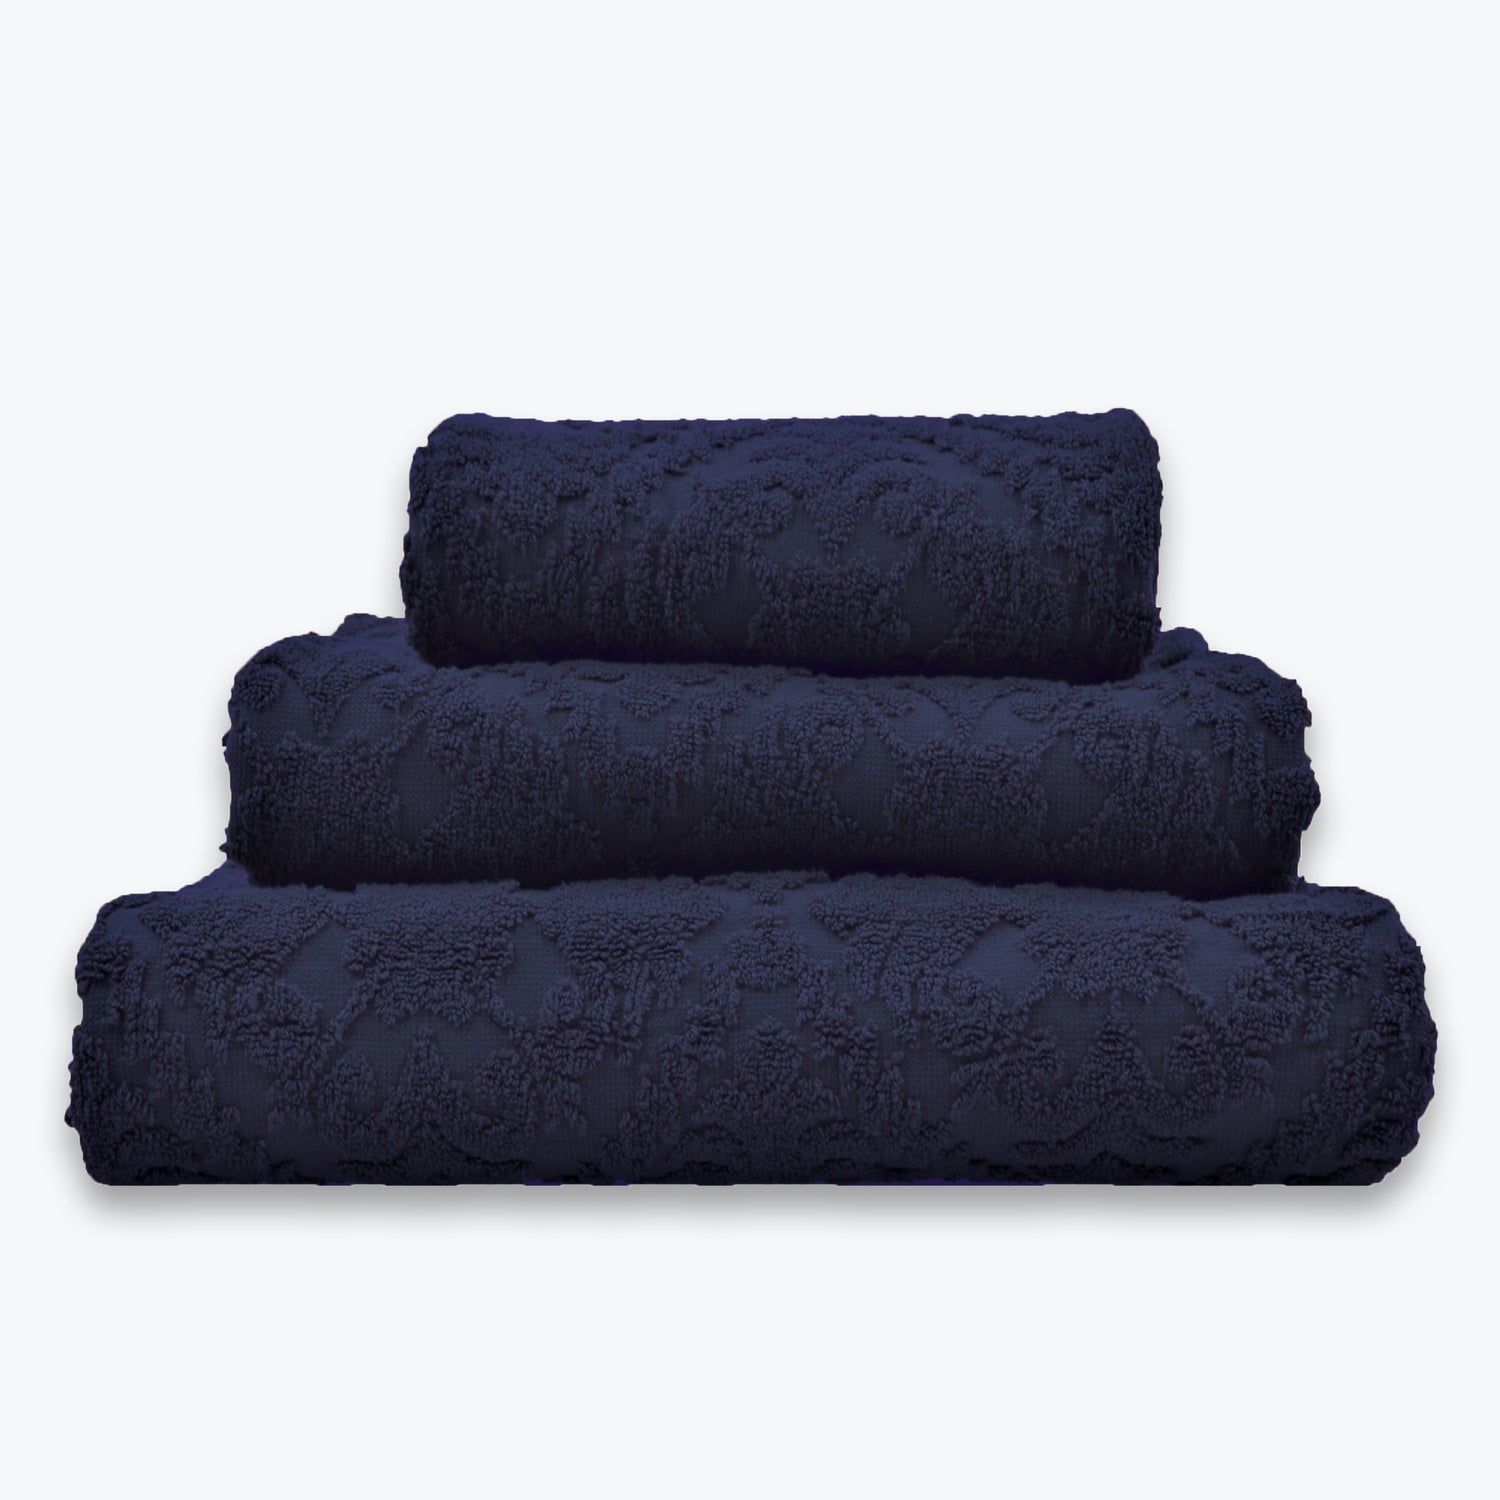 Navy Blue Country House Towel Set - Floral Textured Bathroom Towels